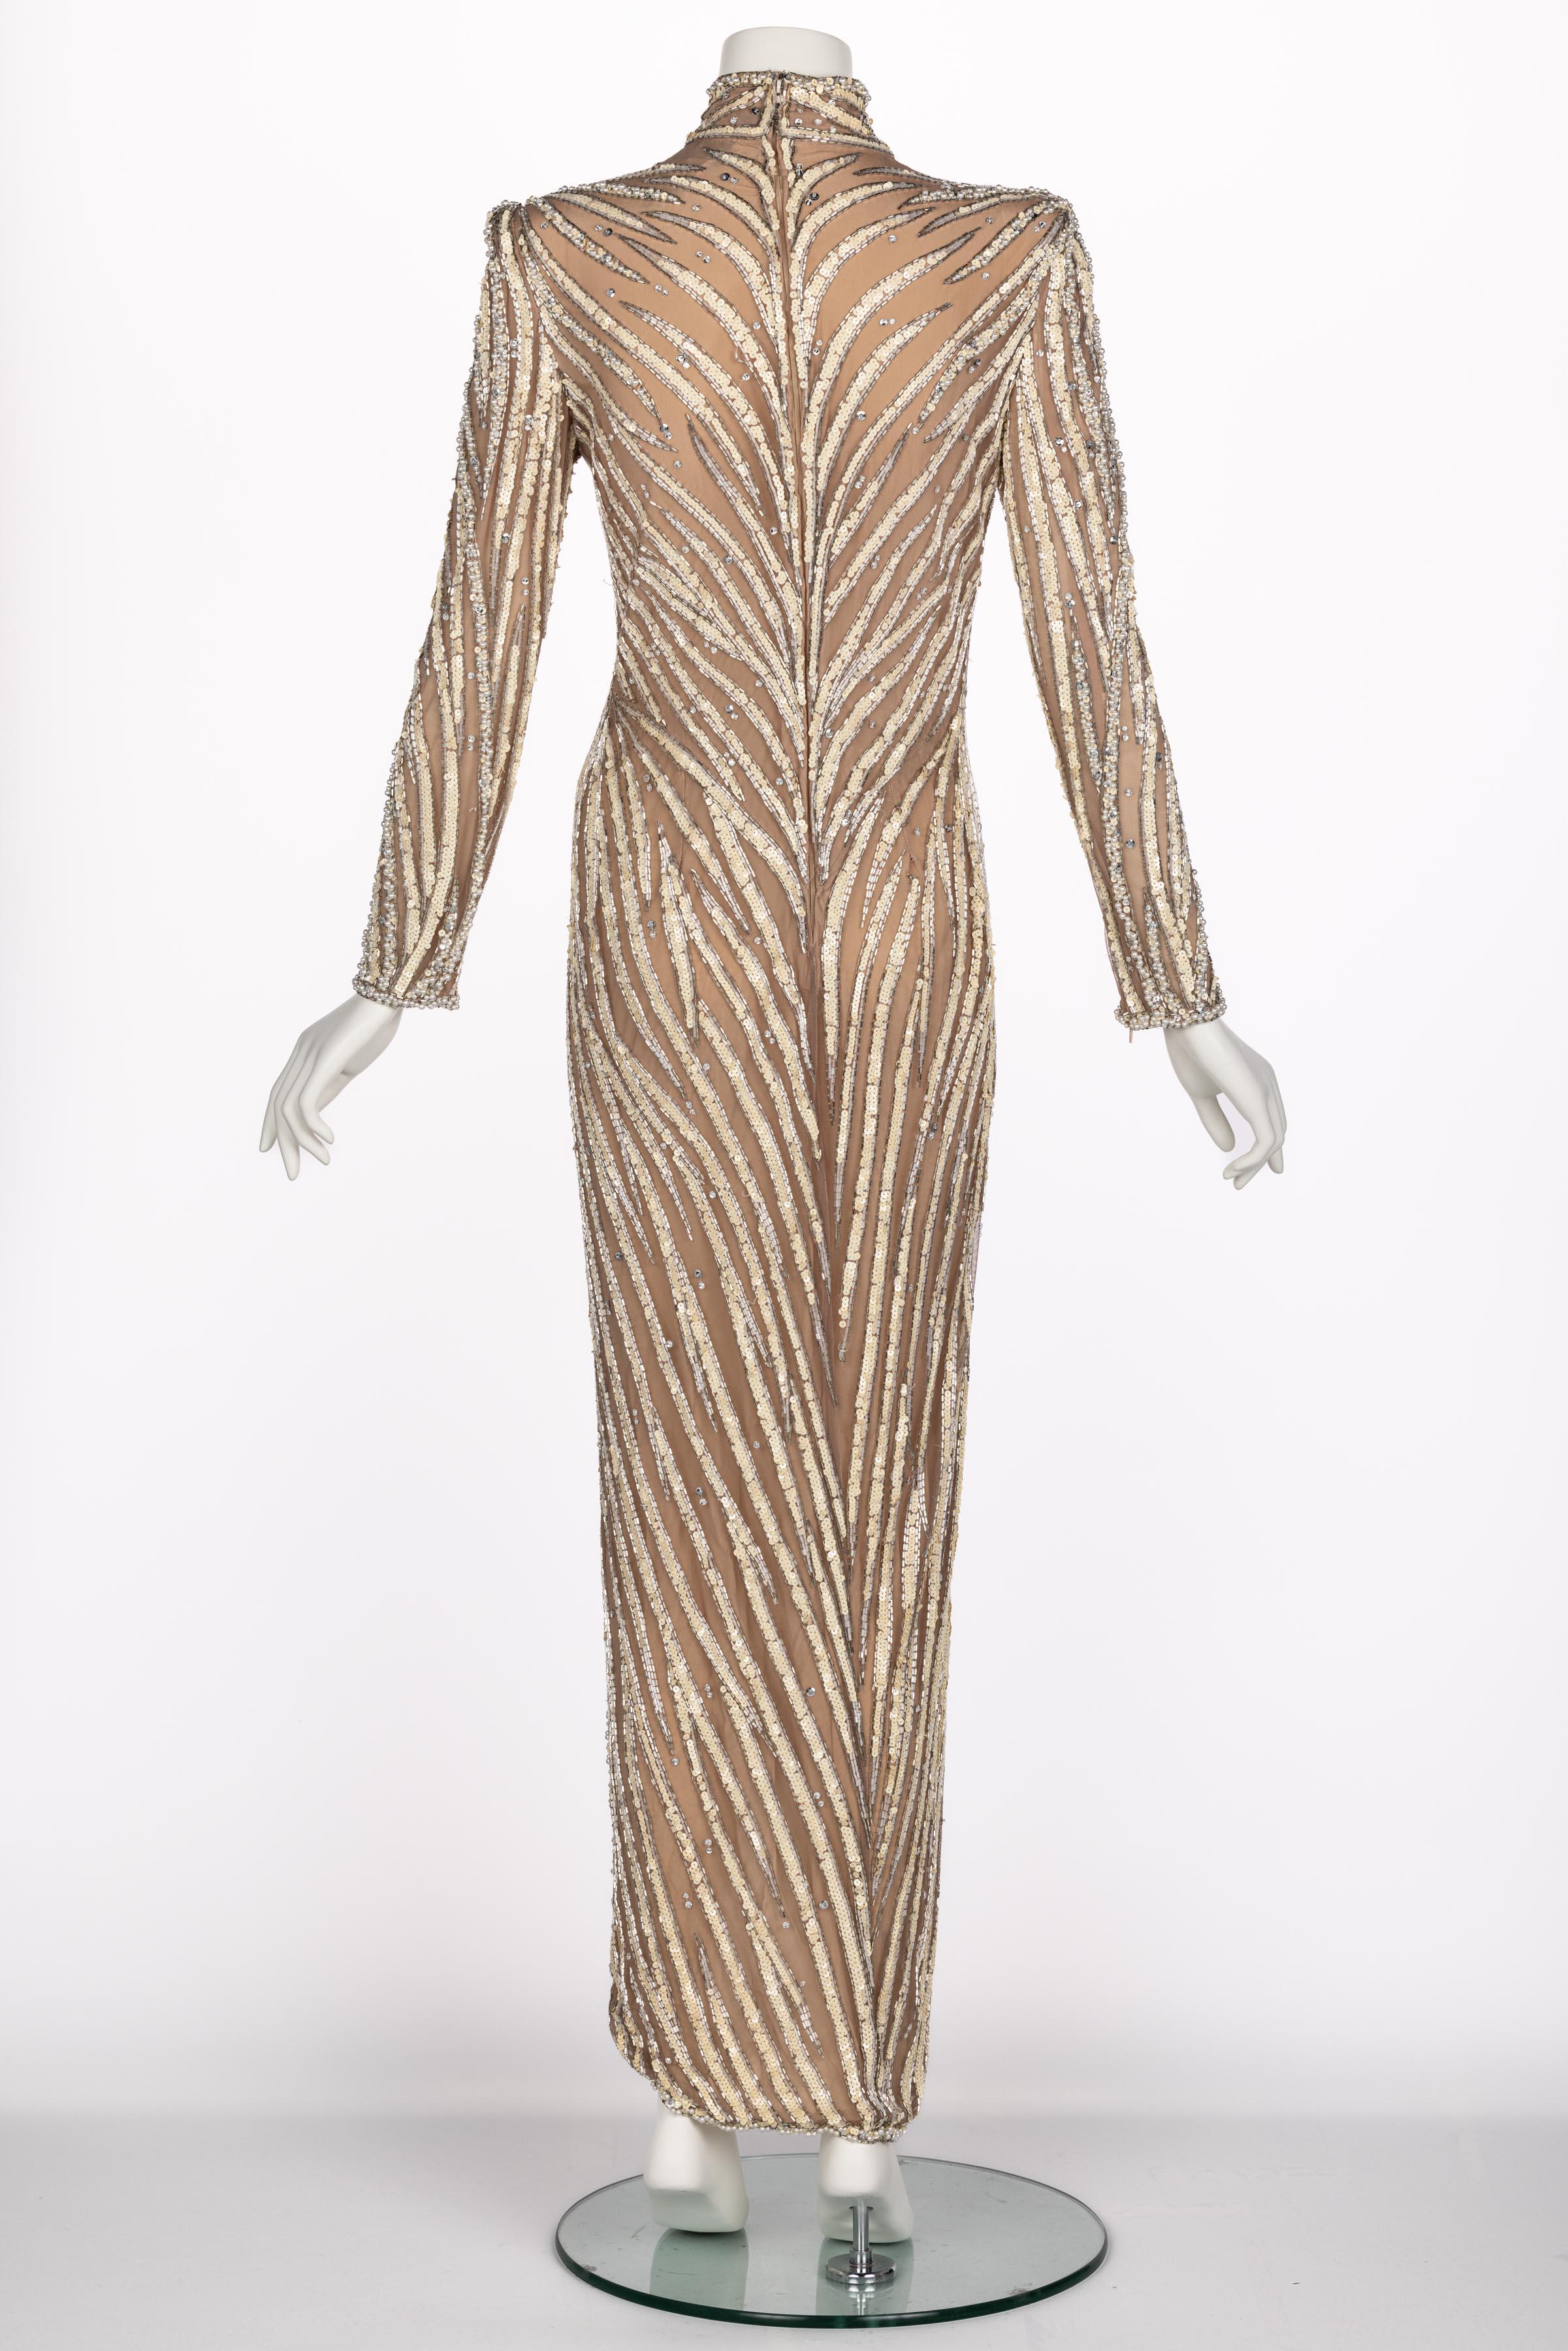 Brown Bob Mackie Ivory Sequin, Pearls & Nude Stretch Net Thigh High Slit Dress, 1980s For Sale